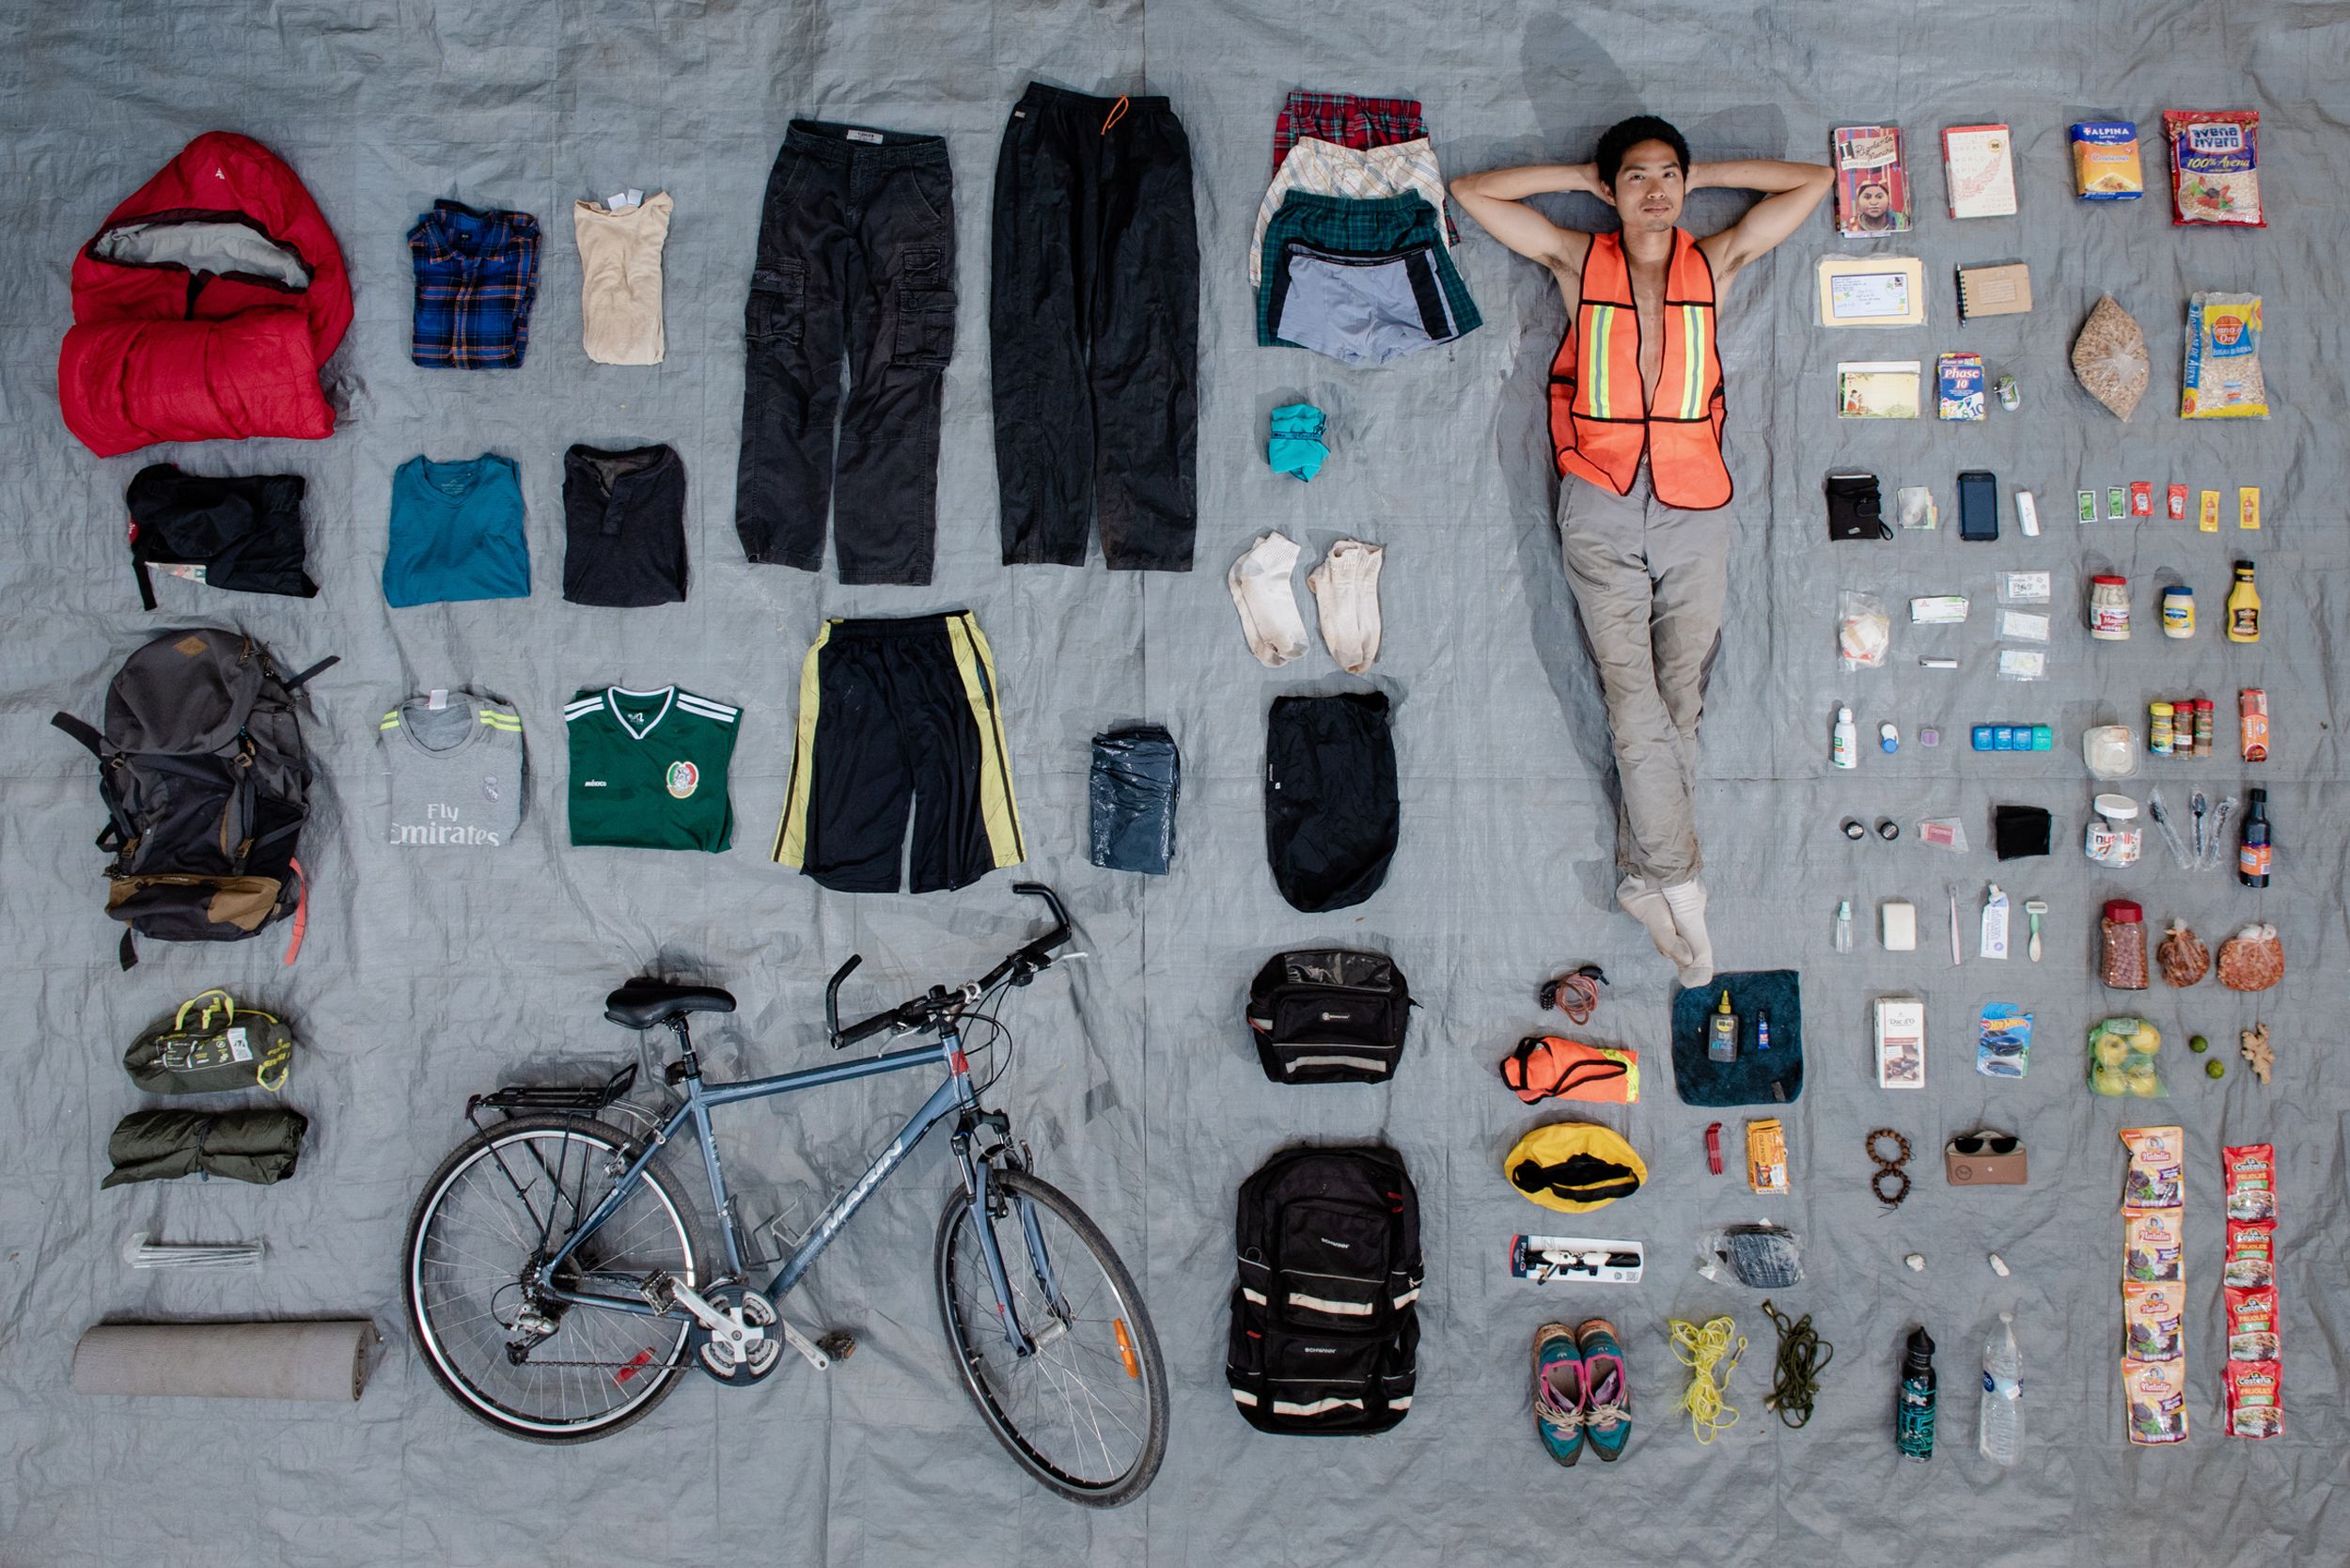 What to Pack for Bike Ride, According to Cyclists